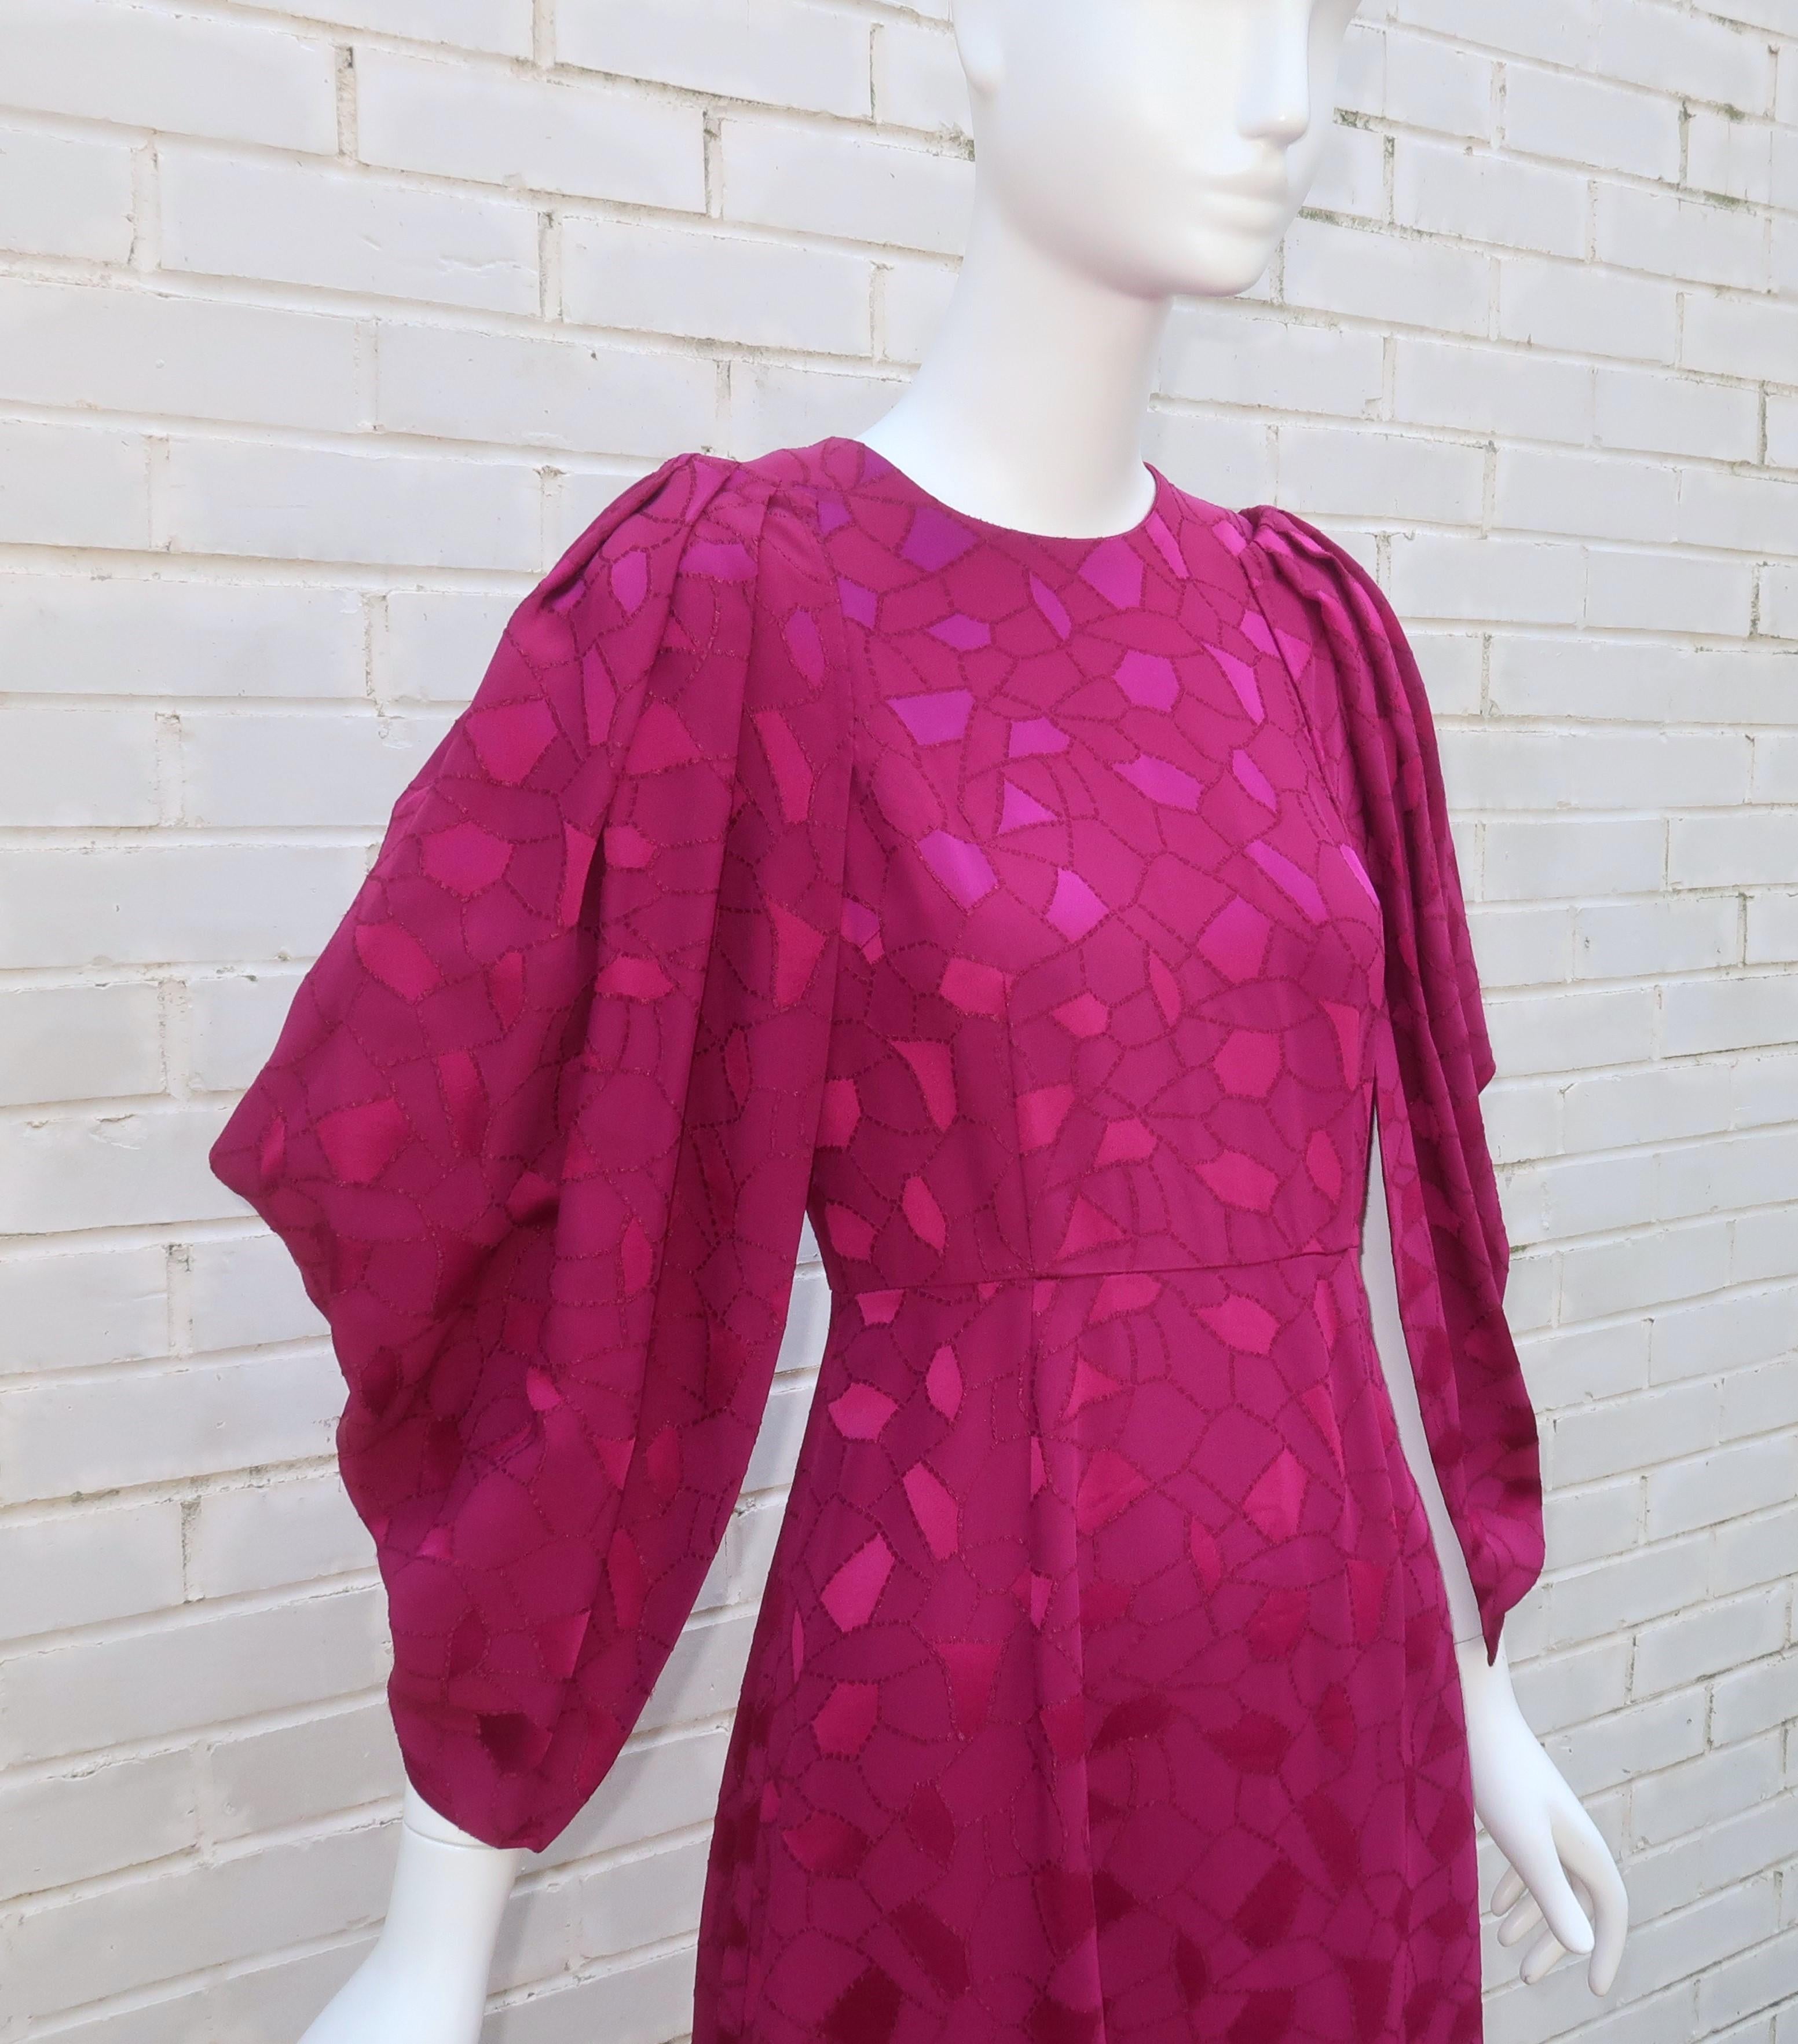 CO Cocoon Sleeve Magenta Dress, 2018 In Excellent Condition For Sale In Atlanta, GA